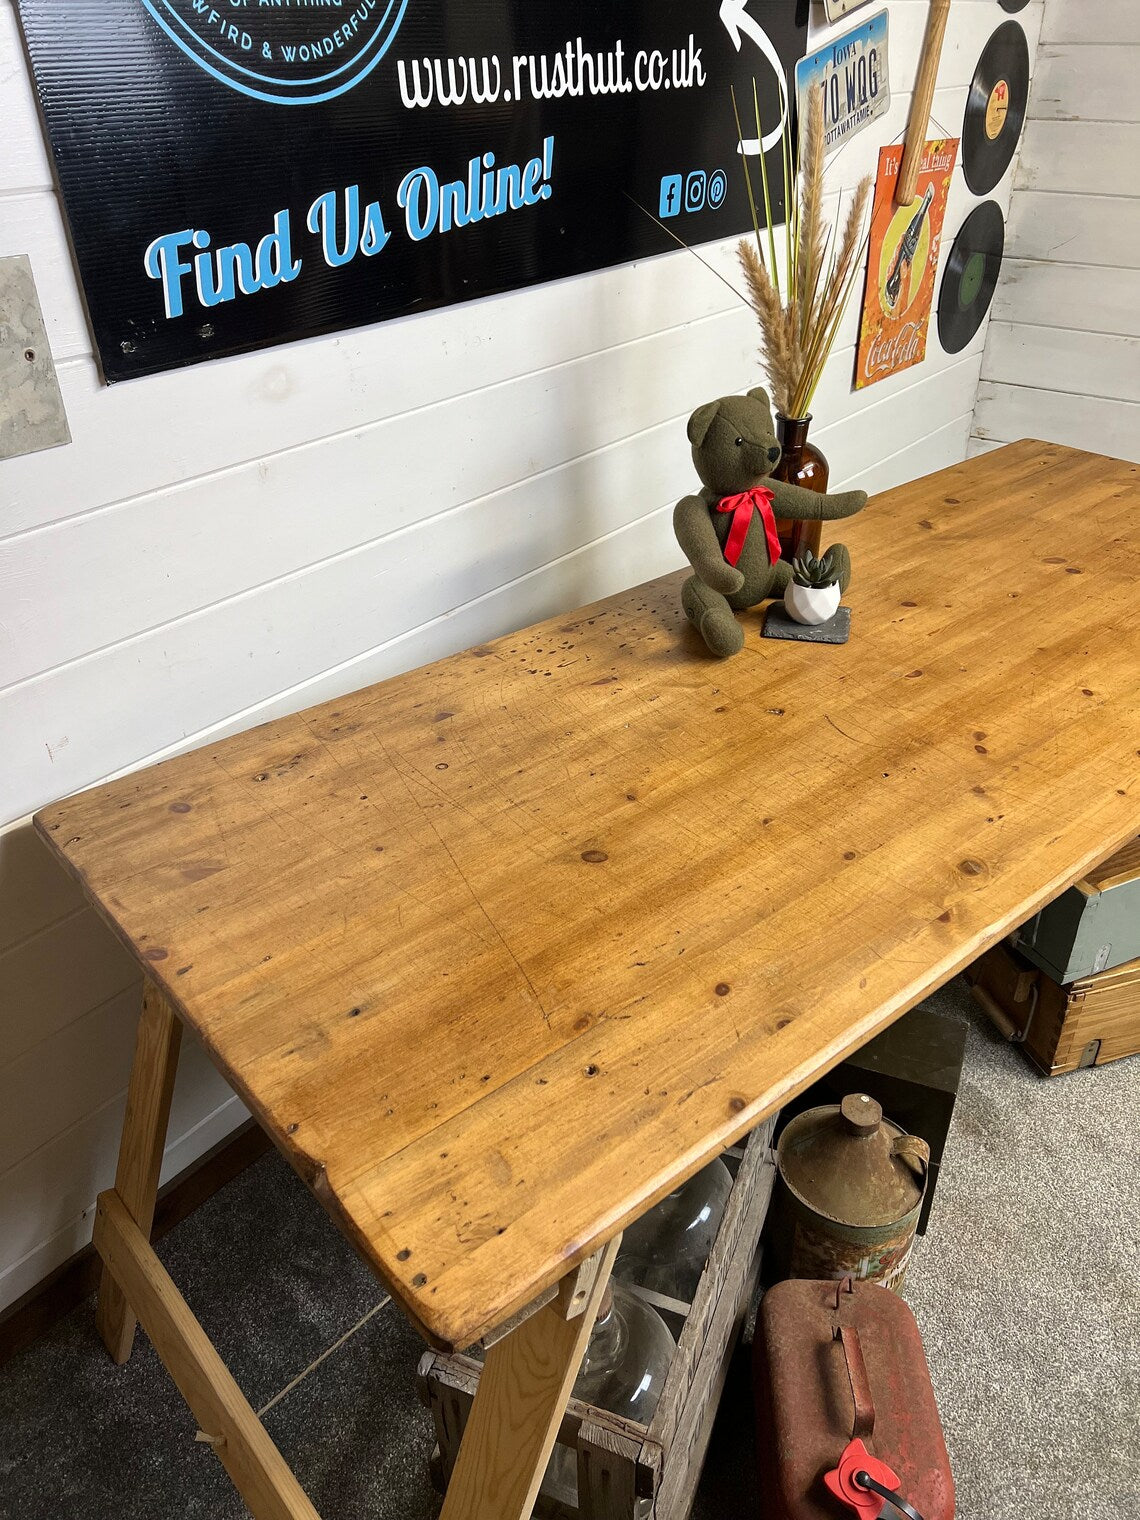 Rustic Industrial Trestle Table Top Wooden Vintage Table Farmhouse Desk Wedding Chic